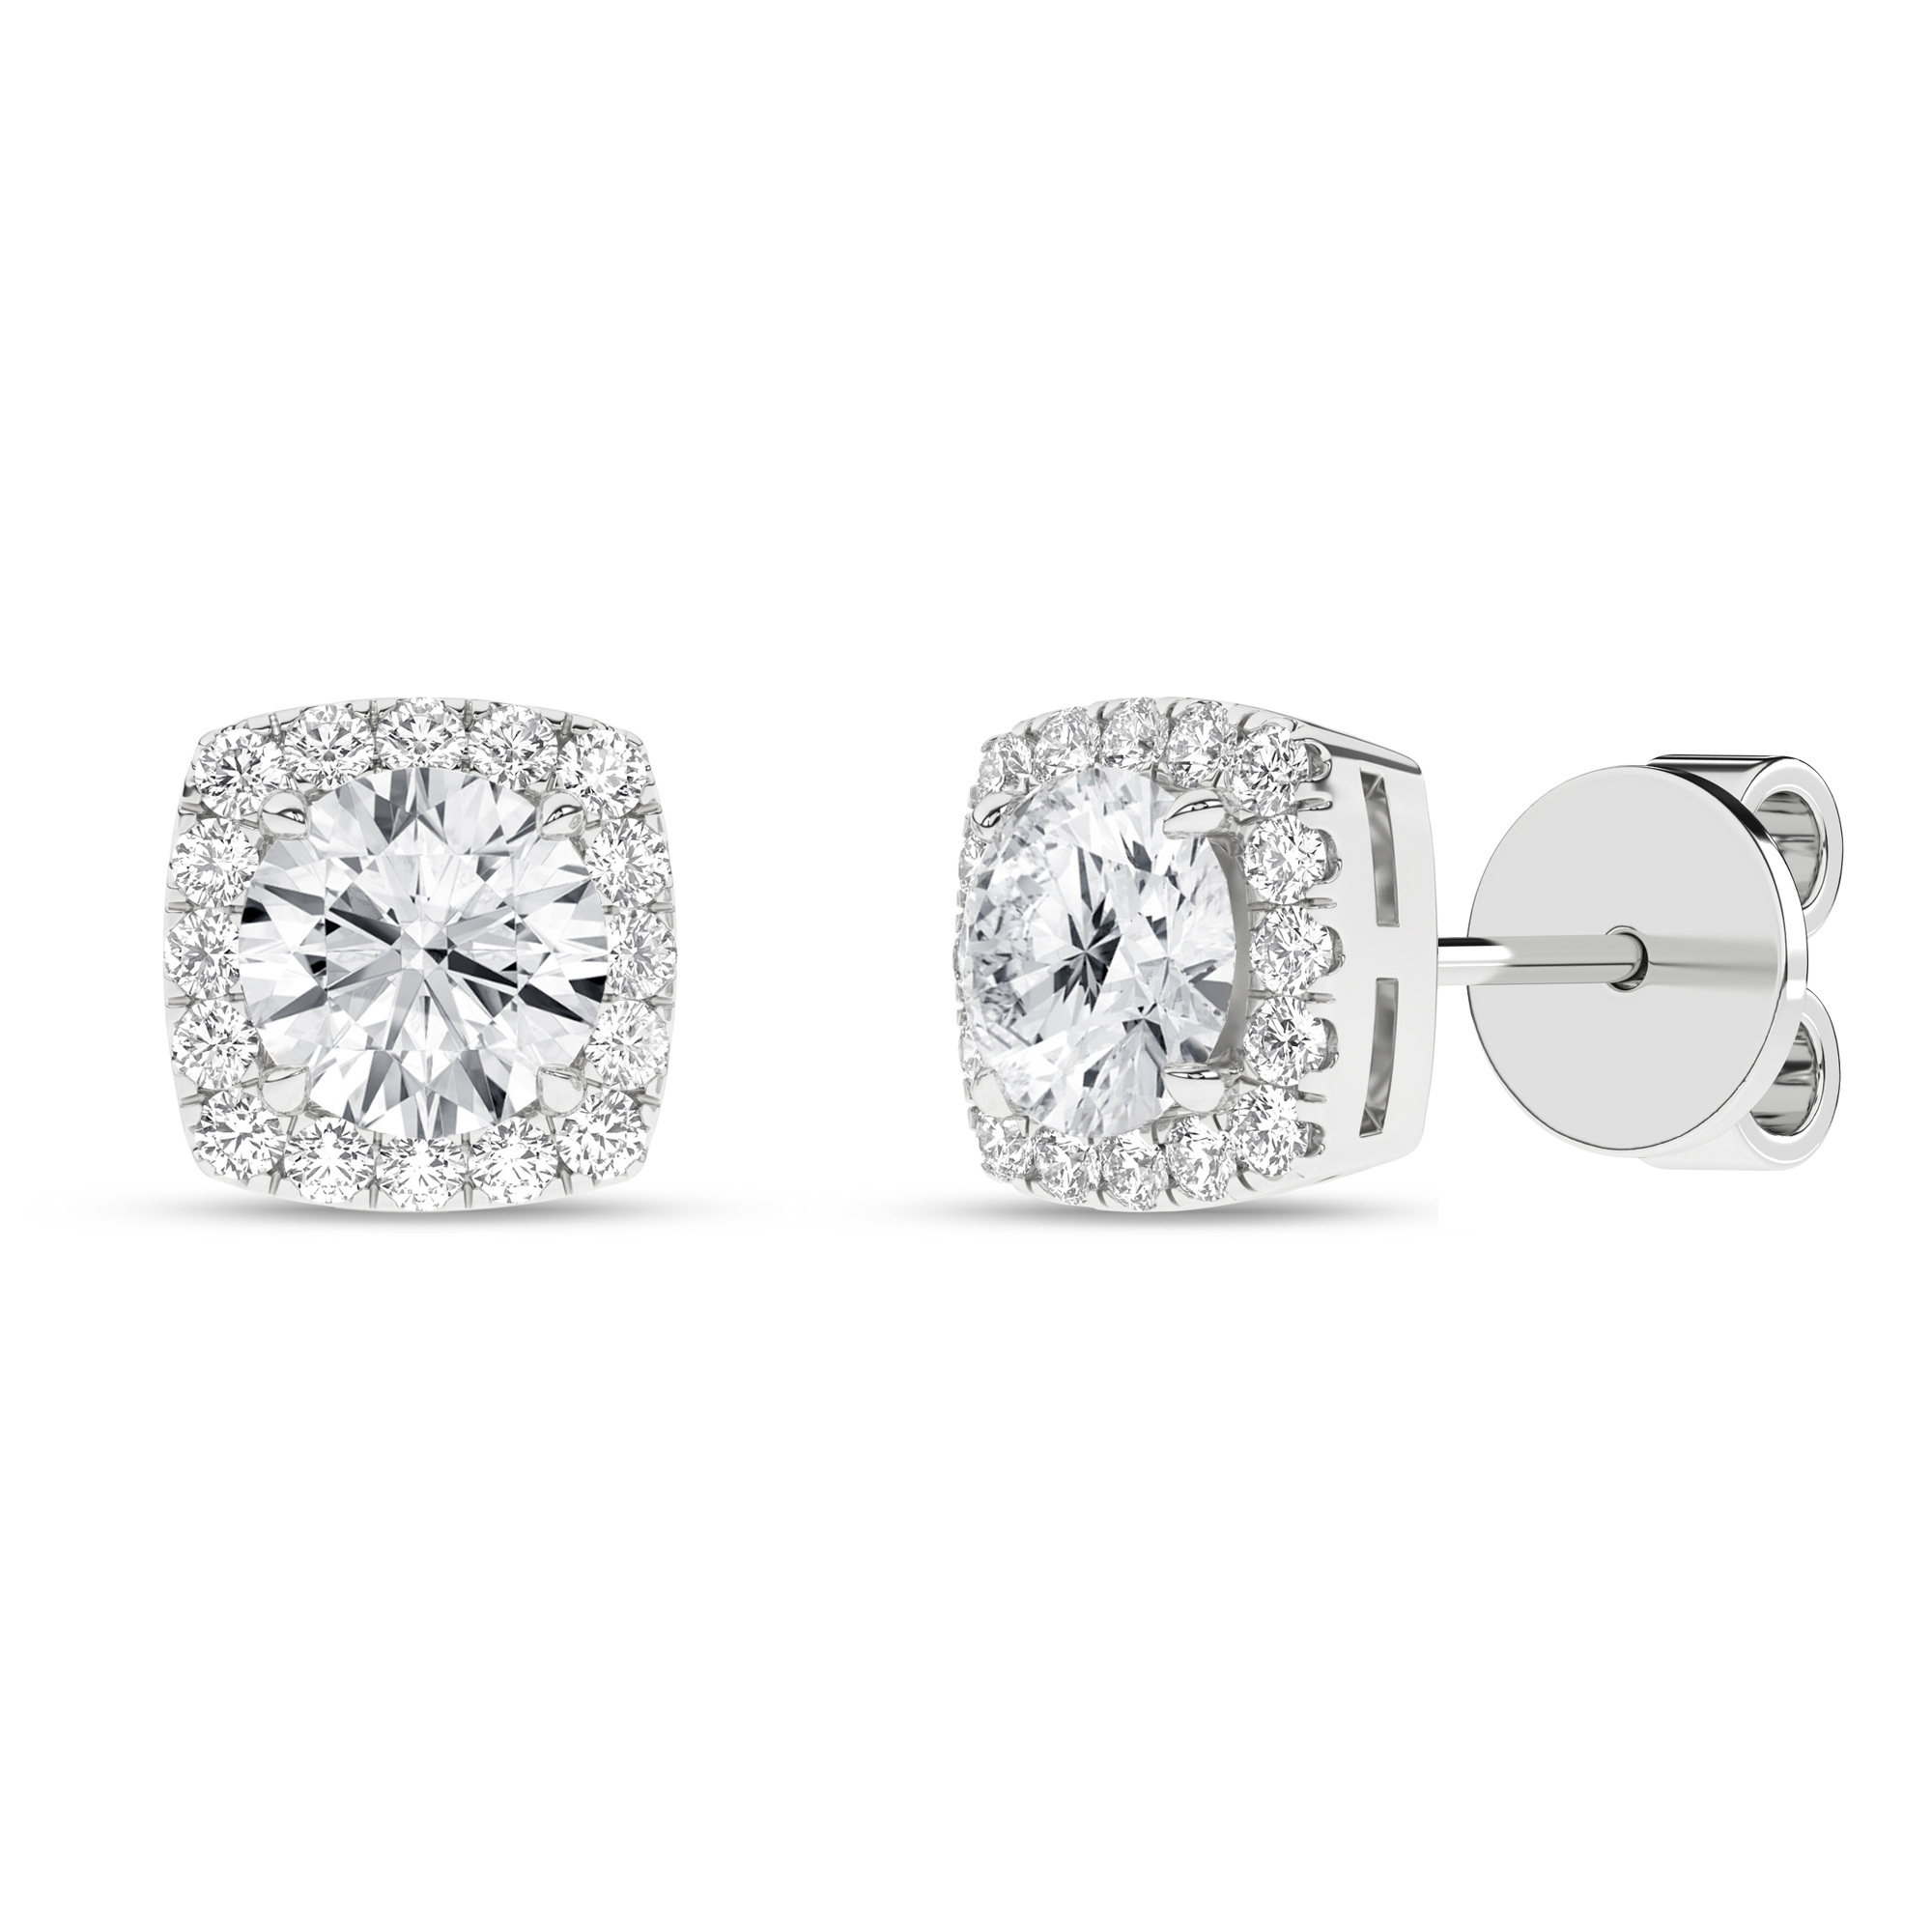 1.16ct. Diamond Halo Earring (Cushion Shape With Round Centre )